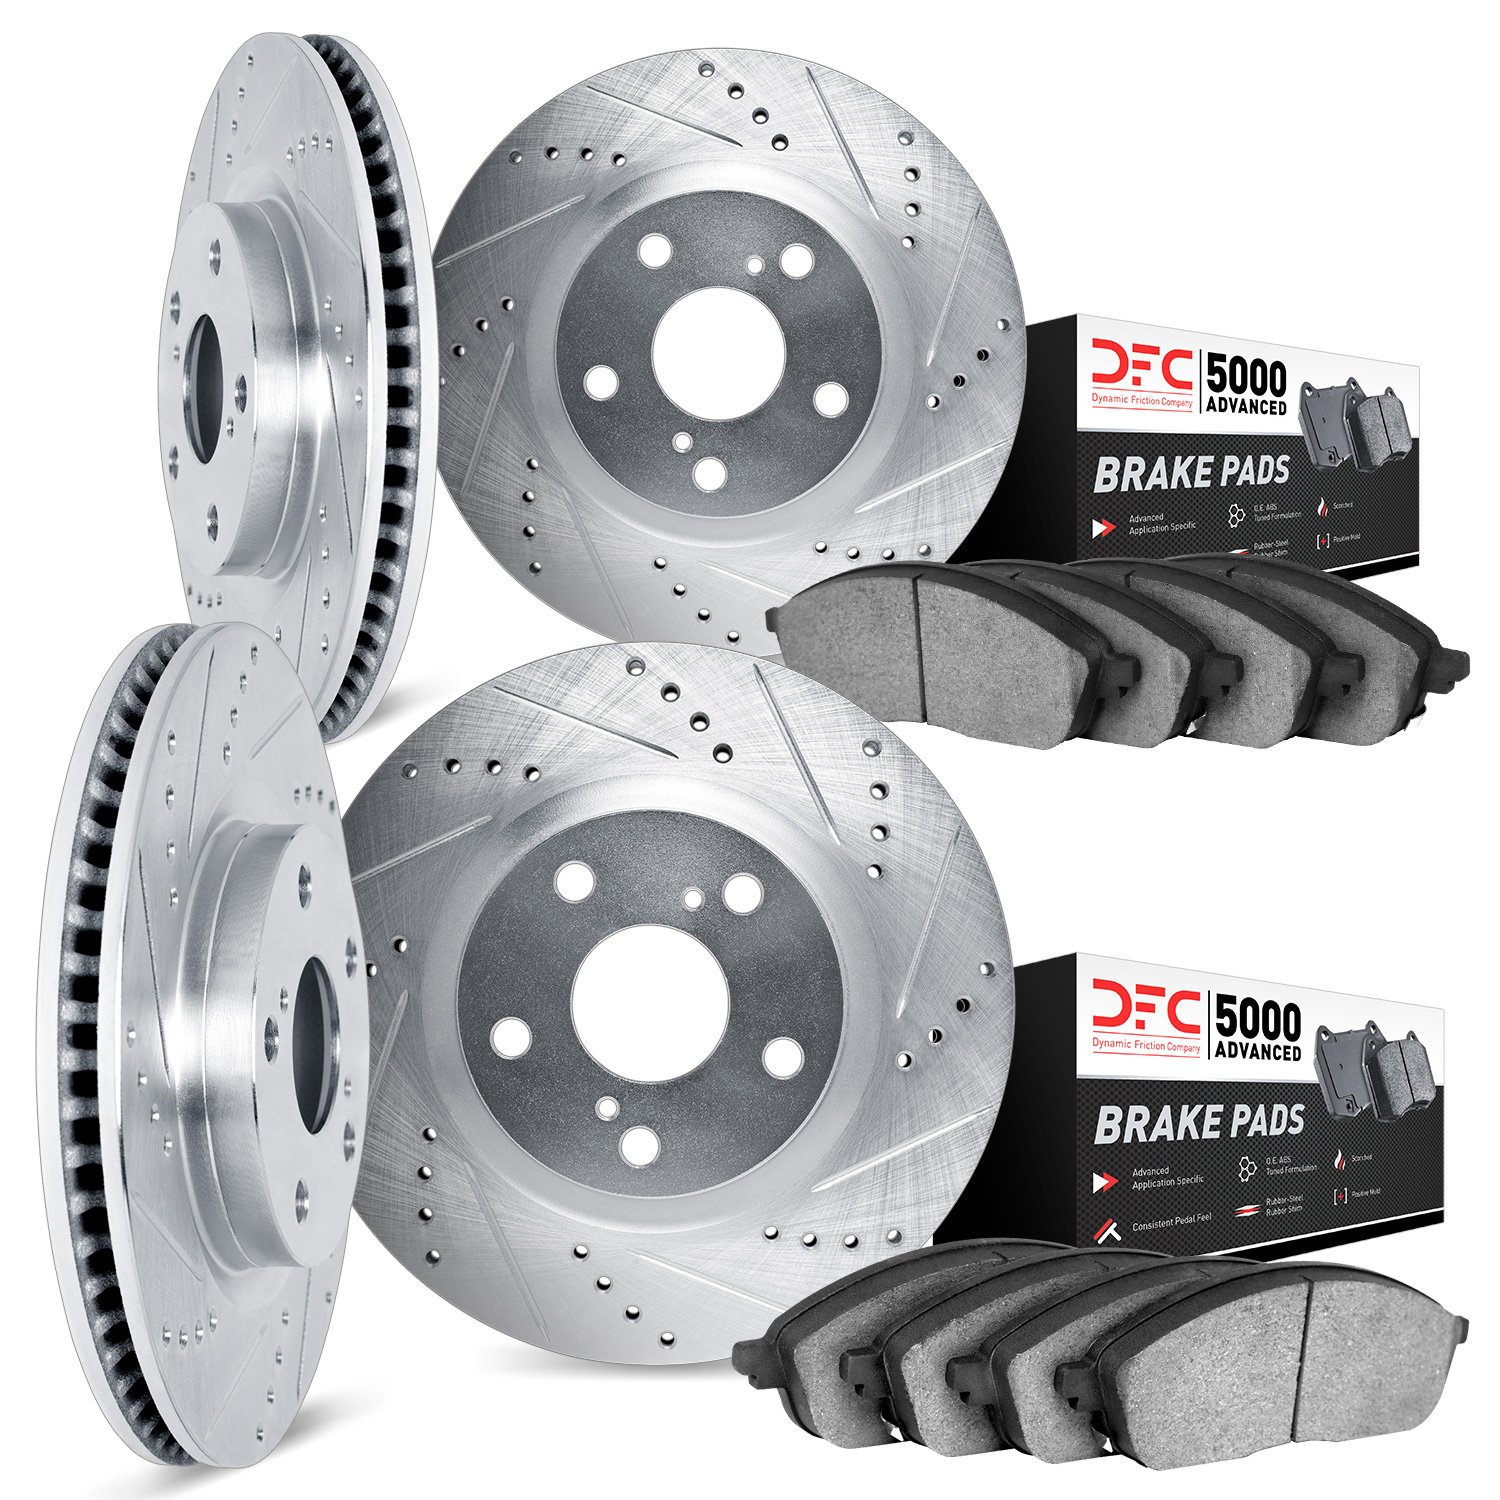 7504-20004 Drilled/Slotted Brake Rotors w/5000 Advanced Brake Pads Kit [Silver], 2005-2006 Jaguar, Position: Front and Rear